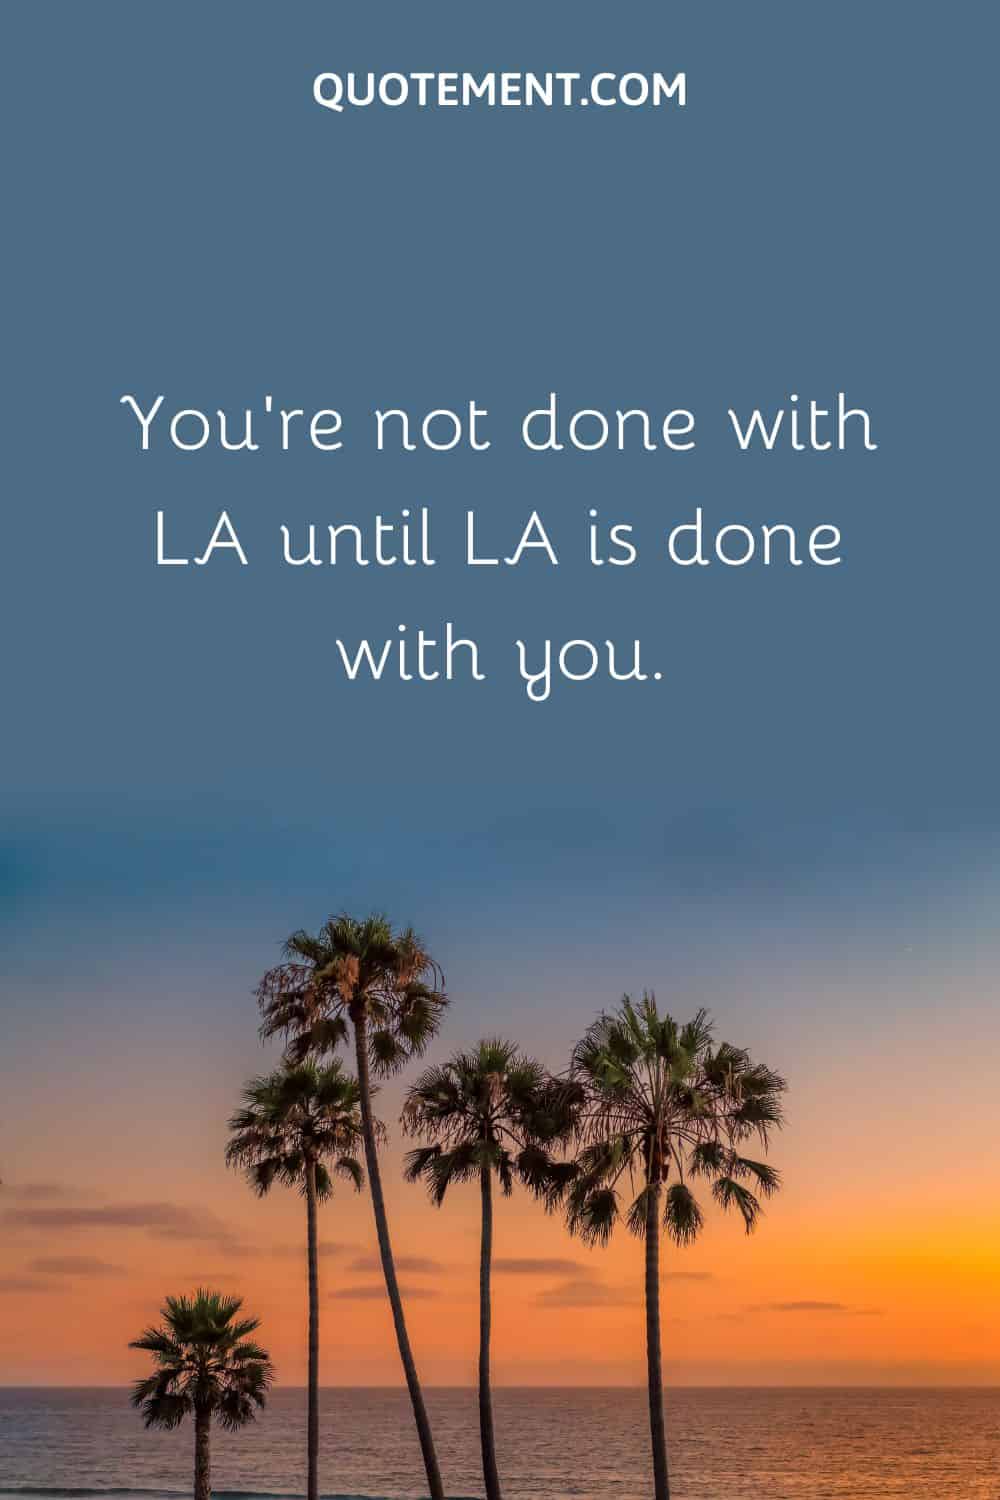 You’re not done with LA until LA is done with you